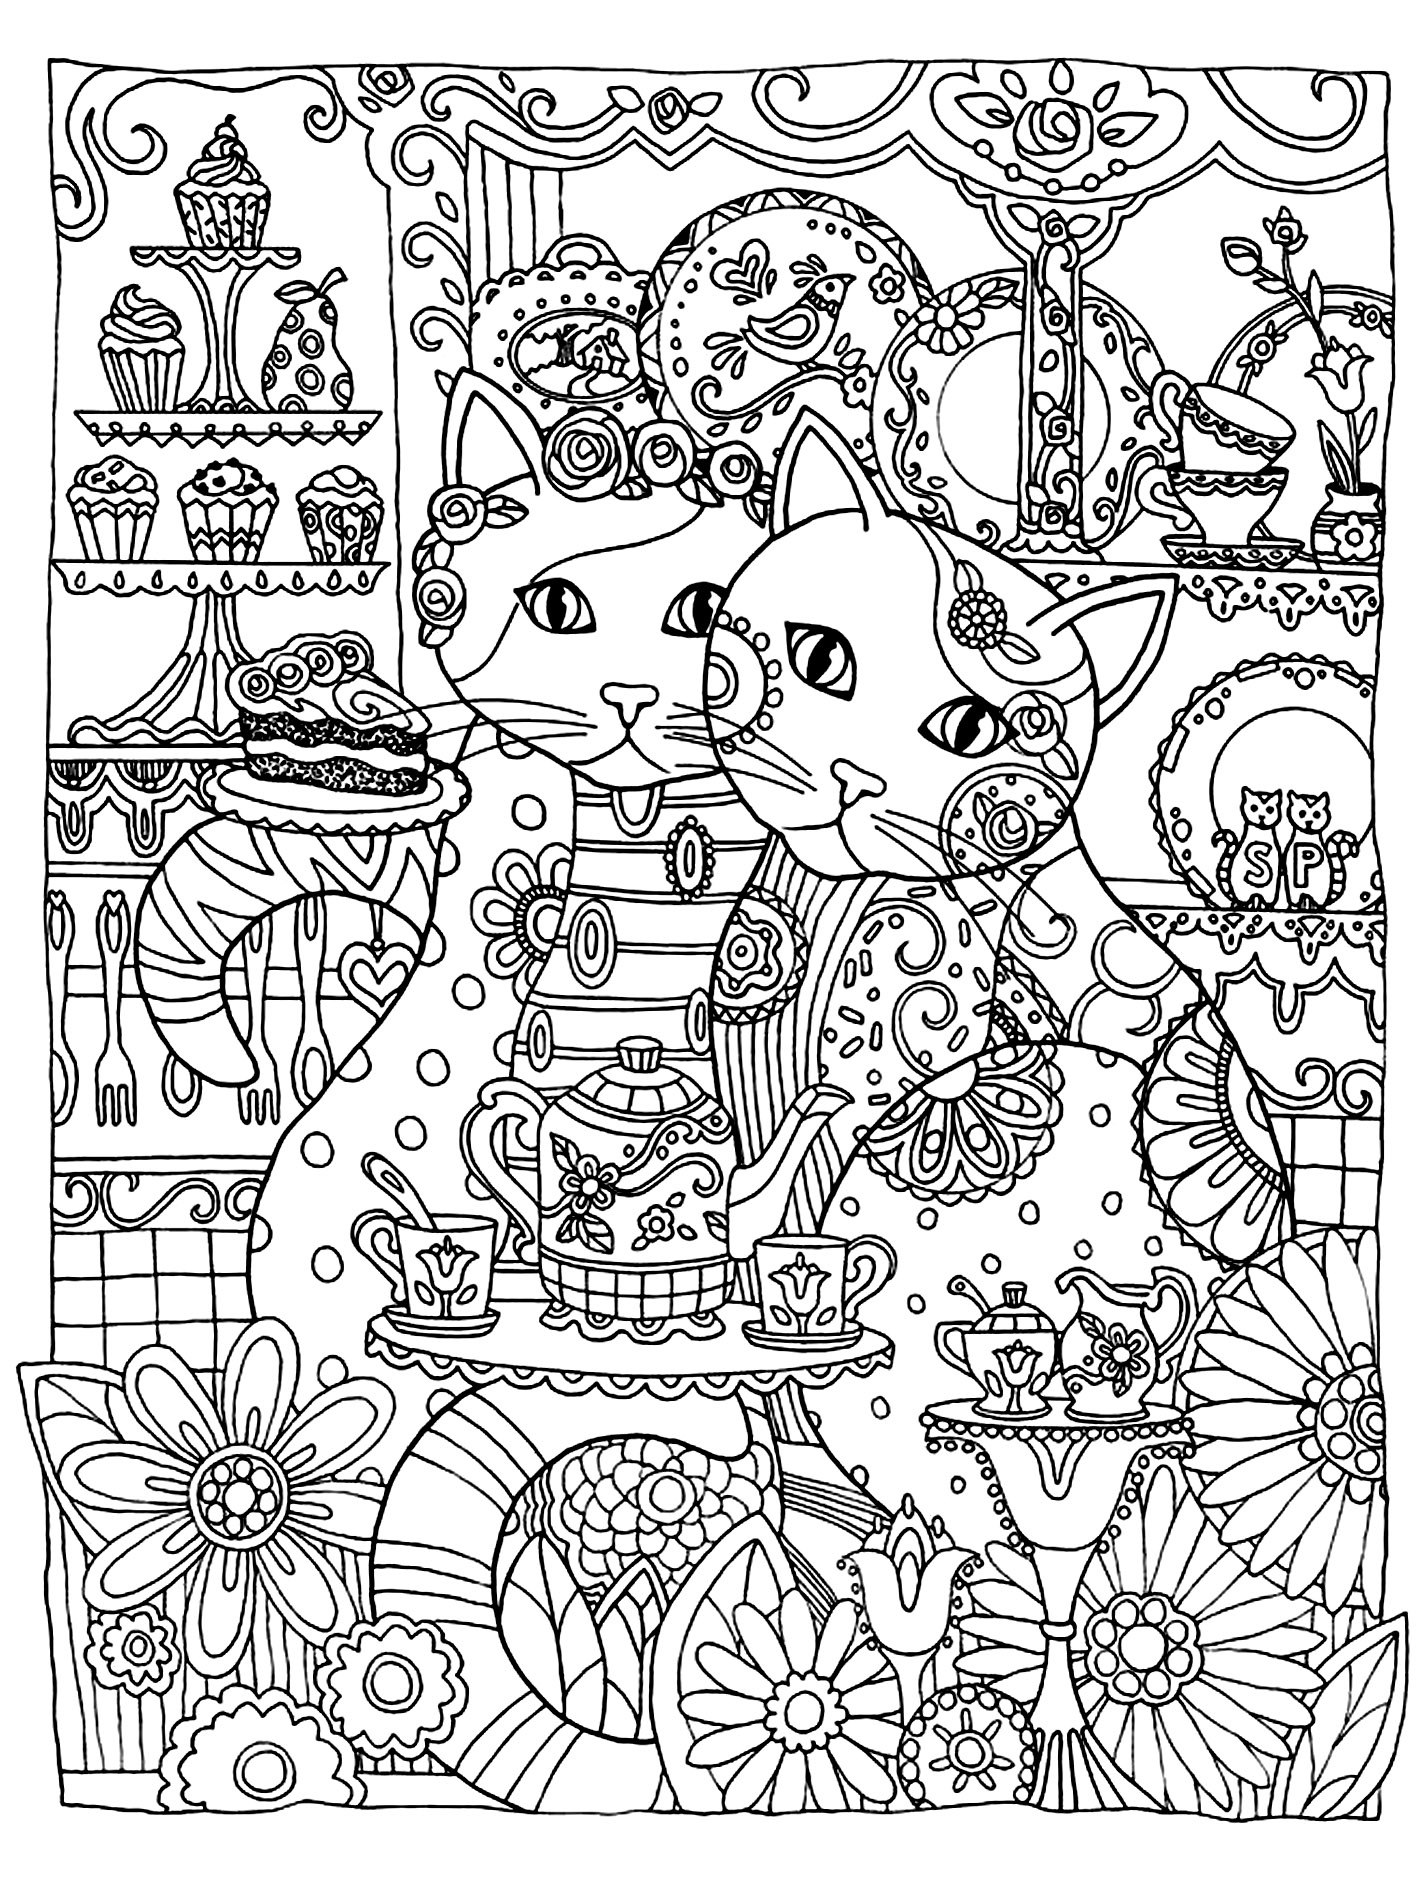 Simple Cat coloring page for kids : Two cats and beautiful objects